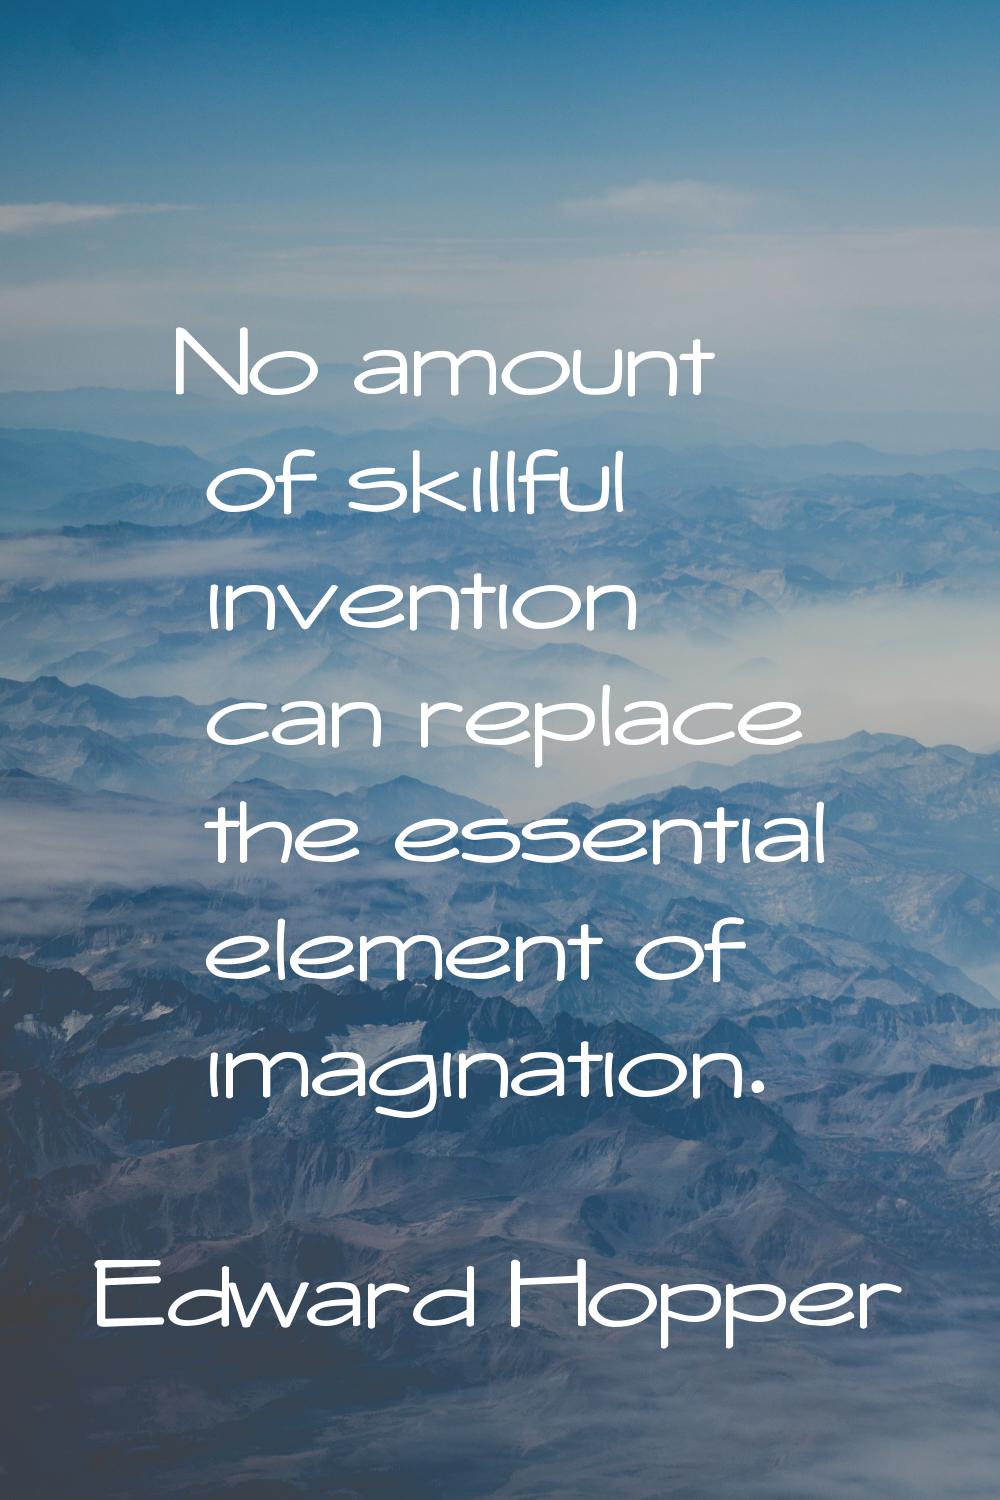 No amount of skillful invention can replace the essential element of imagination.